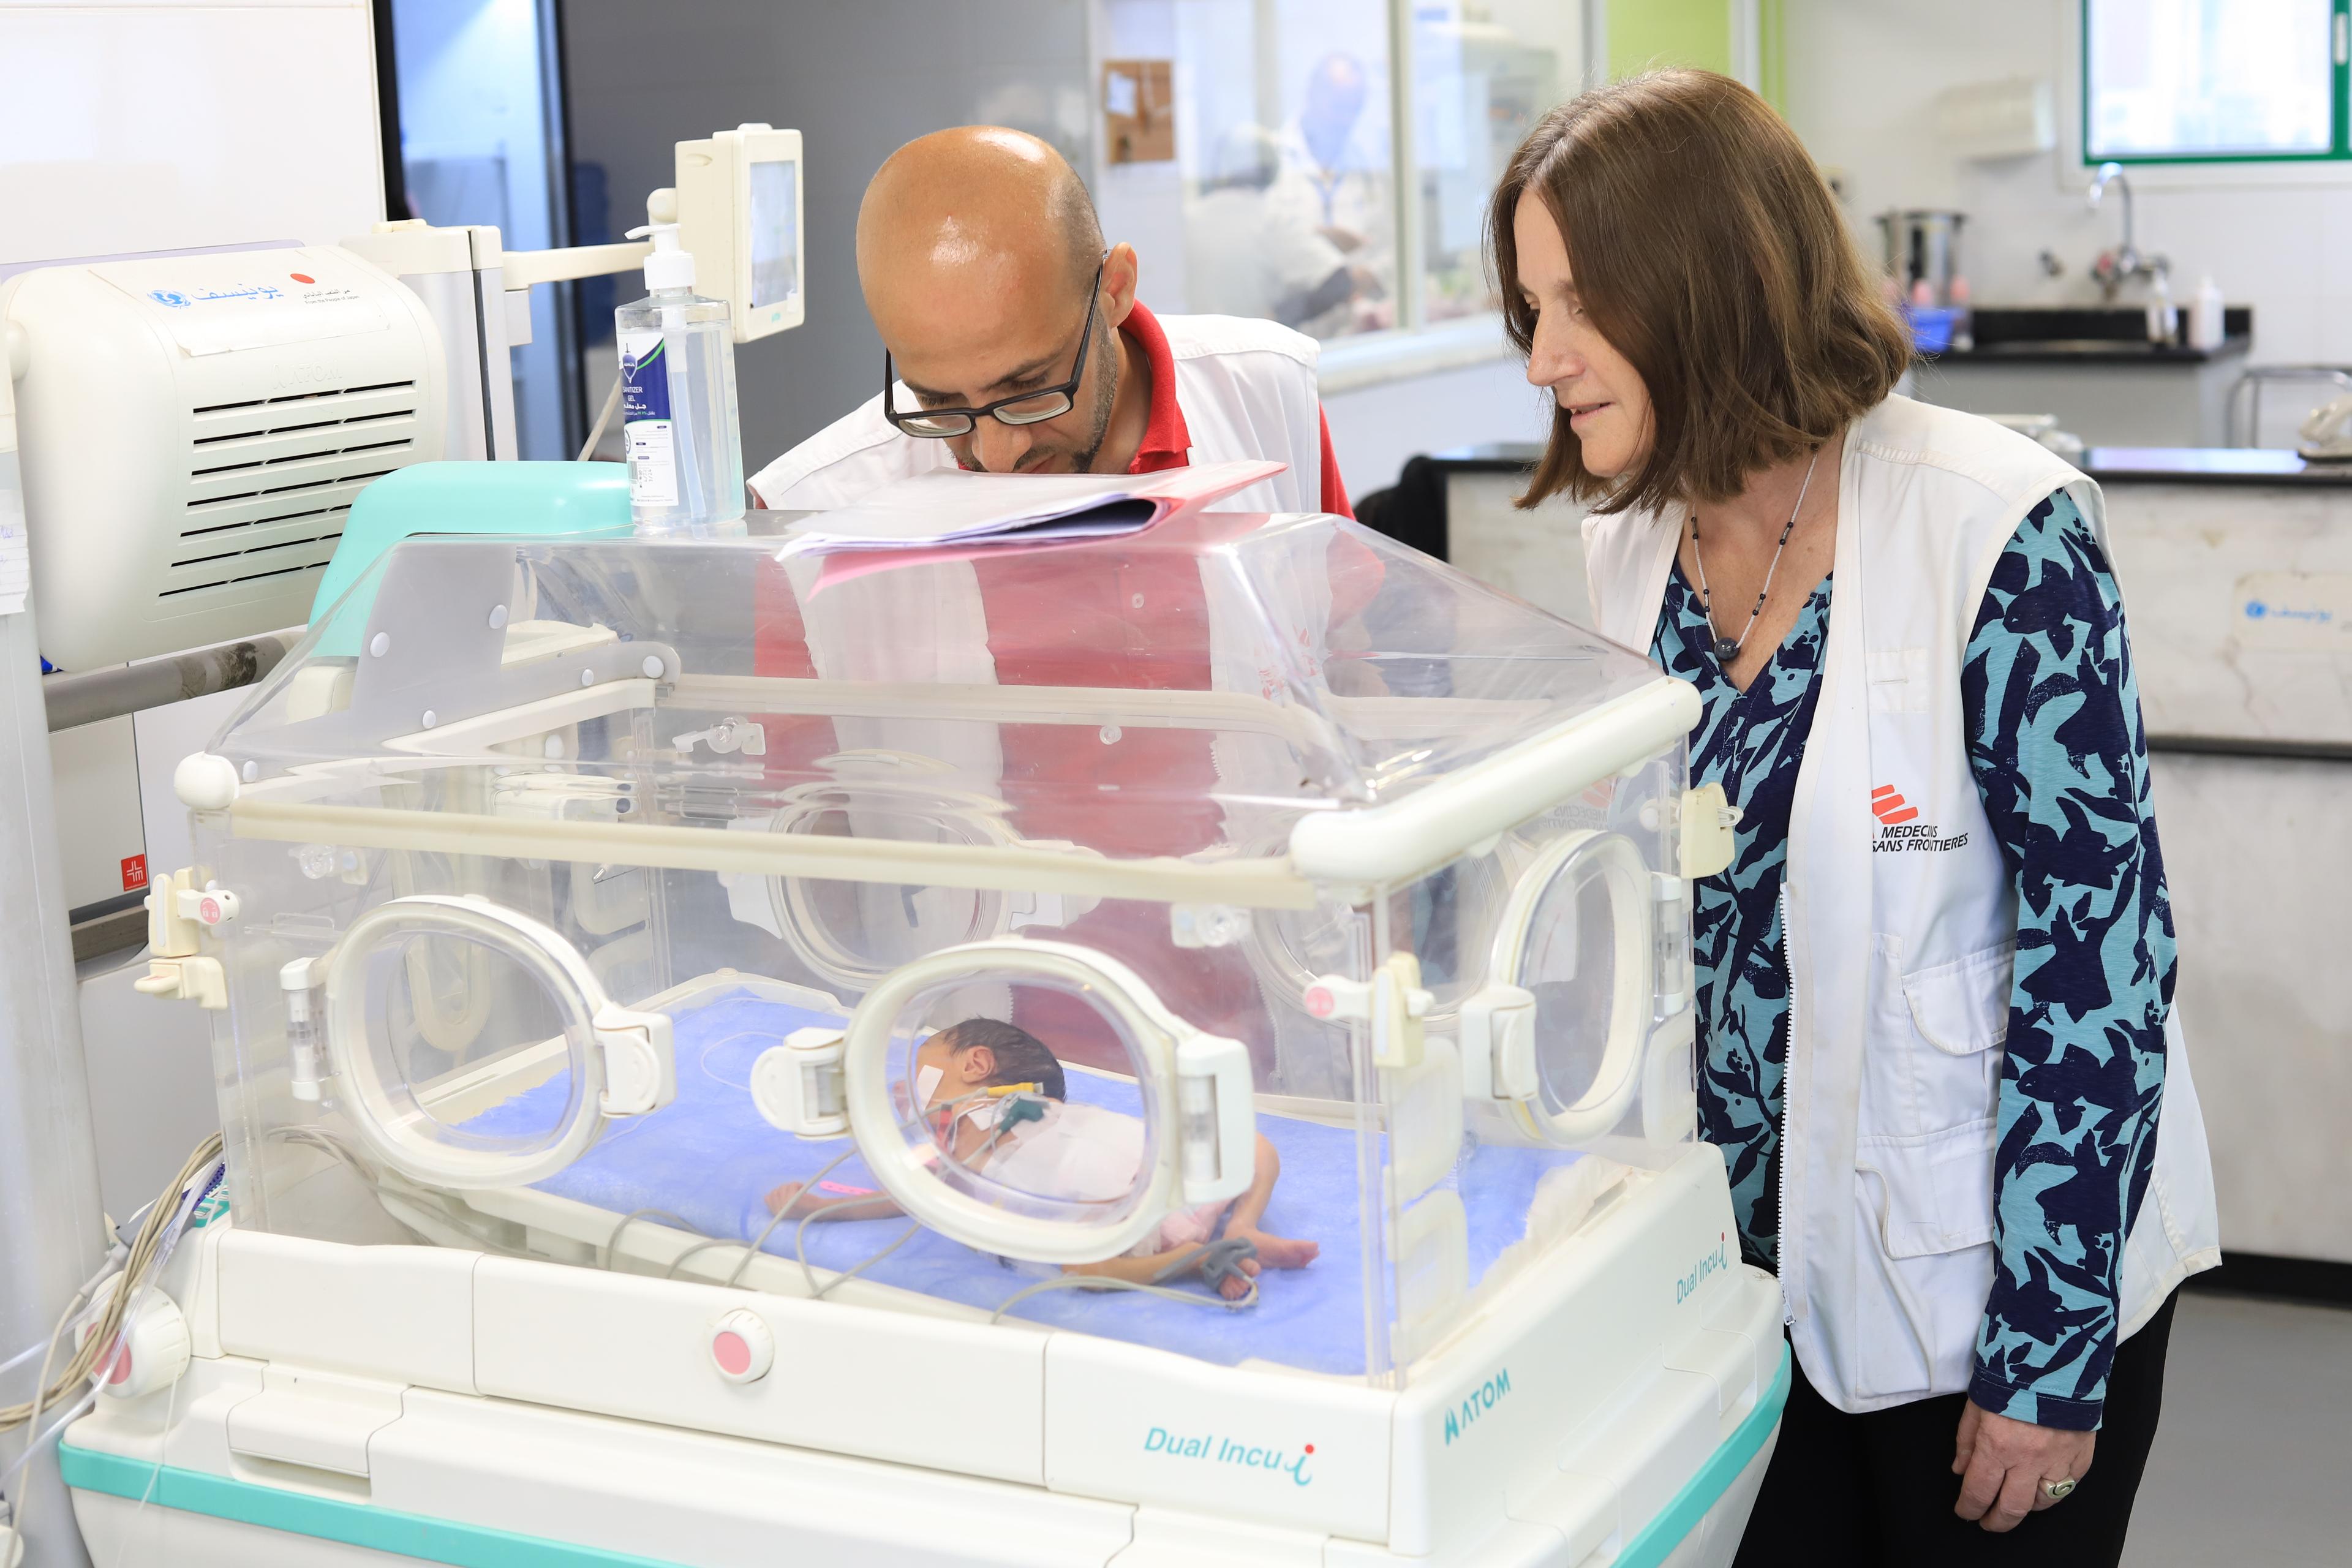 Mohammad Shihada (left), supervising nurse, and Joanne Perry (right), medical referent for the project in Gaza, inspect the maternity ward at Nasser Hospital in southern Gaza. ©Mariam Abu Dagga/MSF .